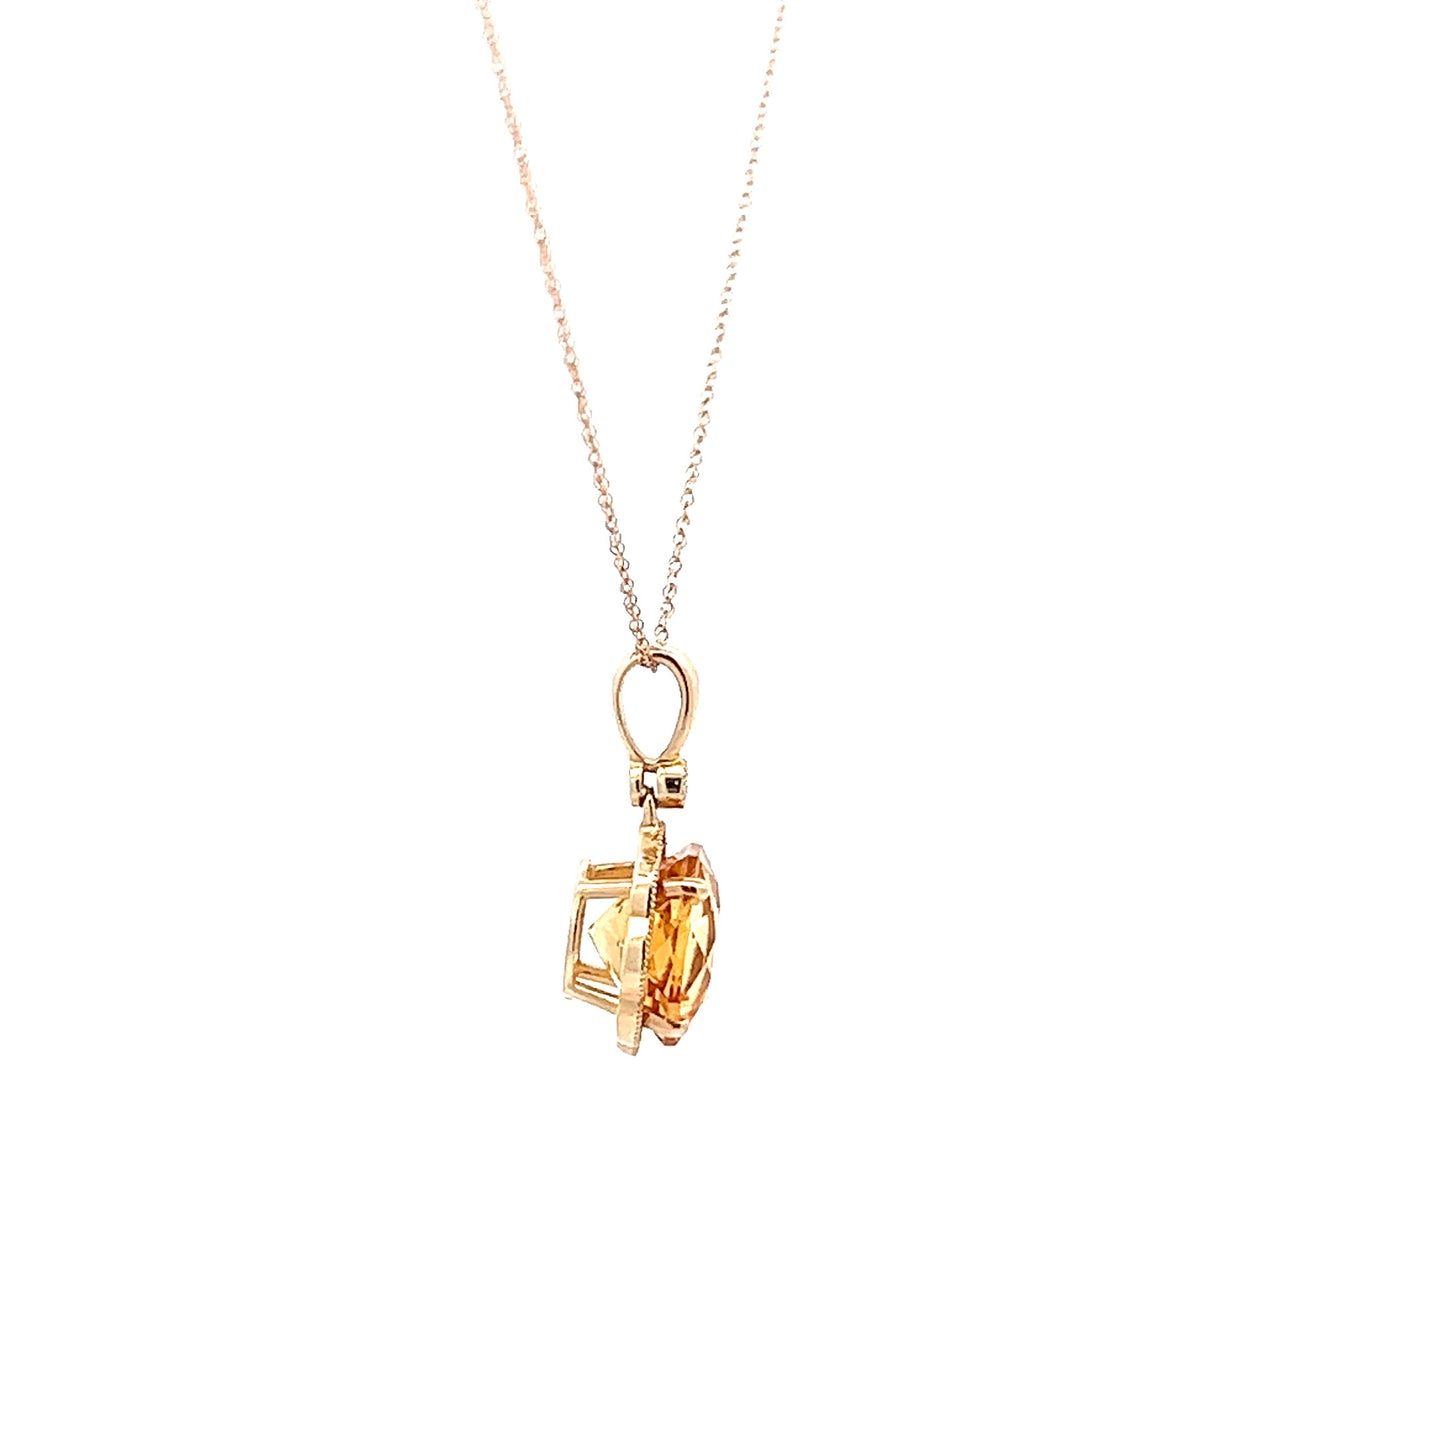 Citrine necklace in yellow gold__2023-06-24-10-41-54-1.jpg